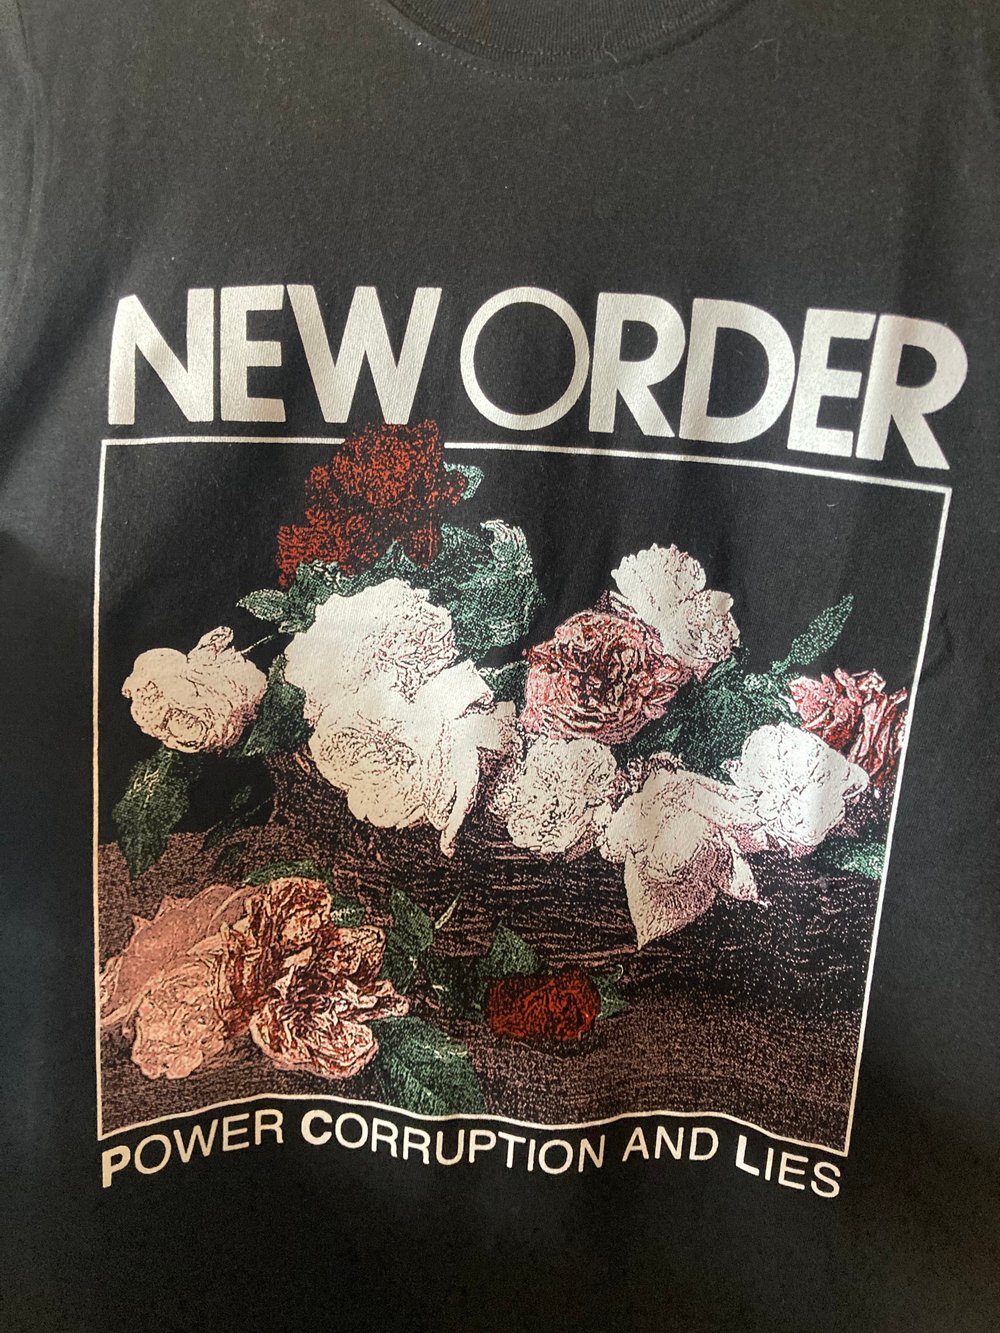 New Order - Power Corruption and Lies Tee